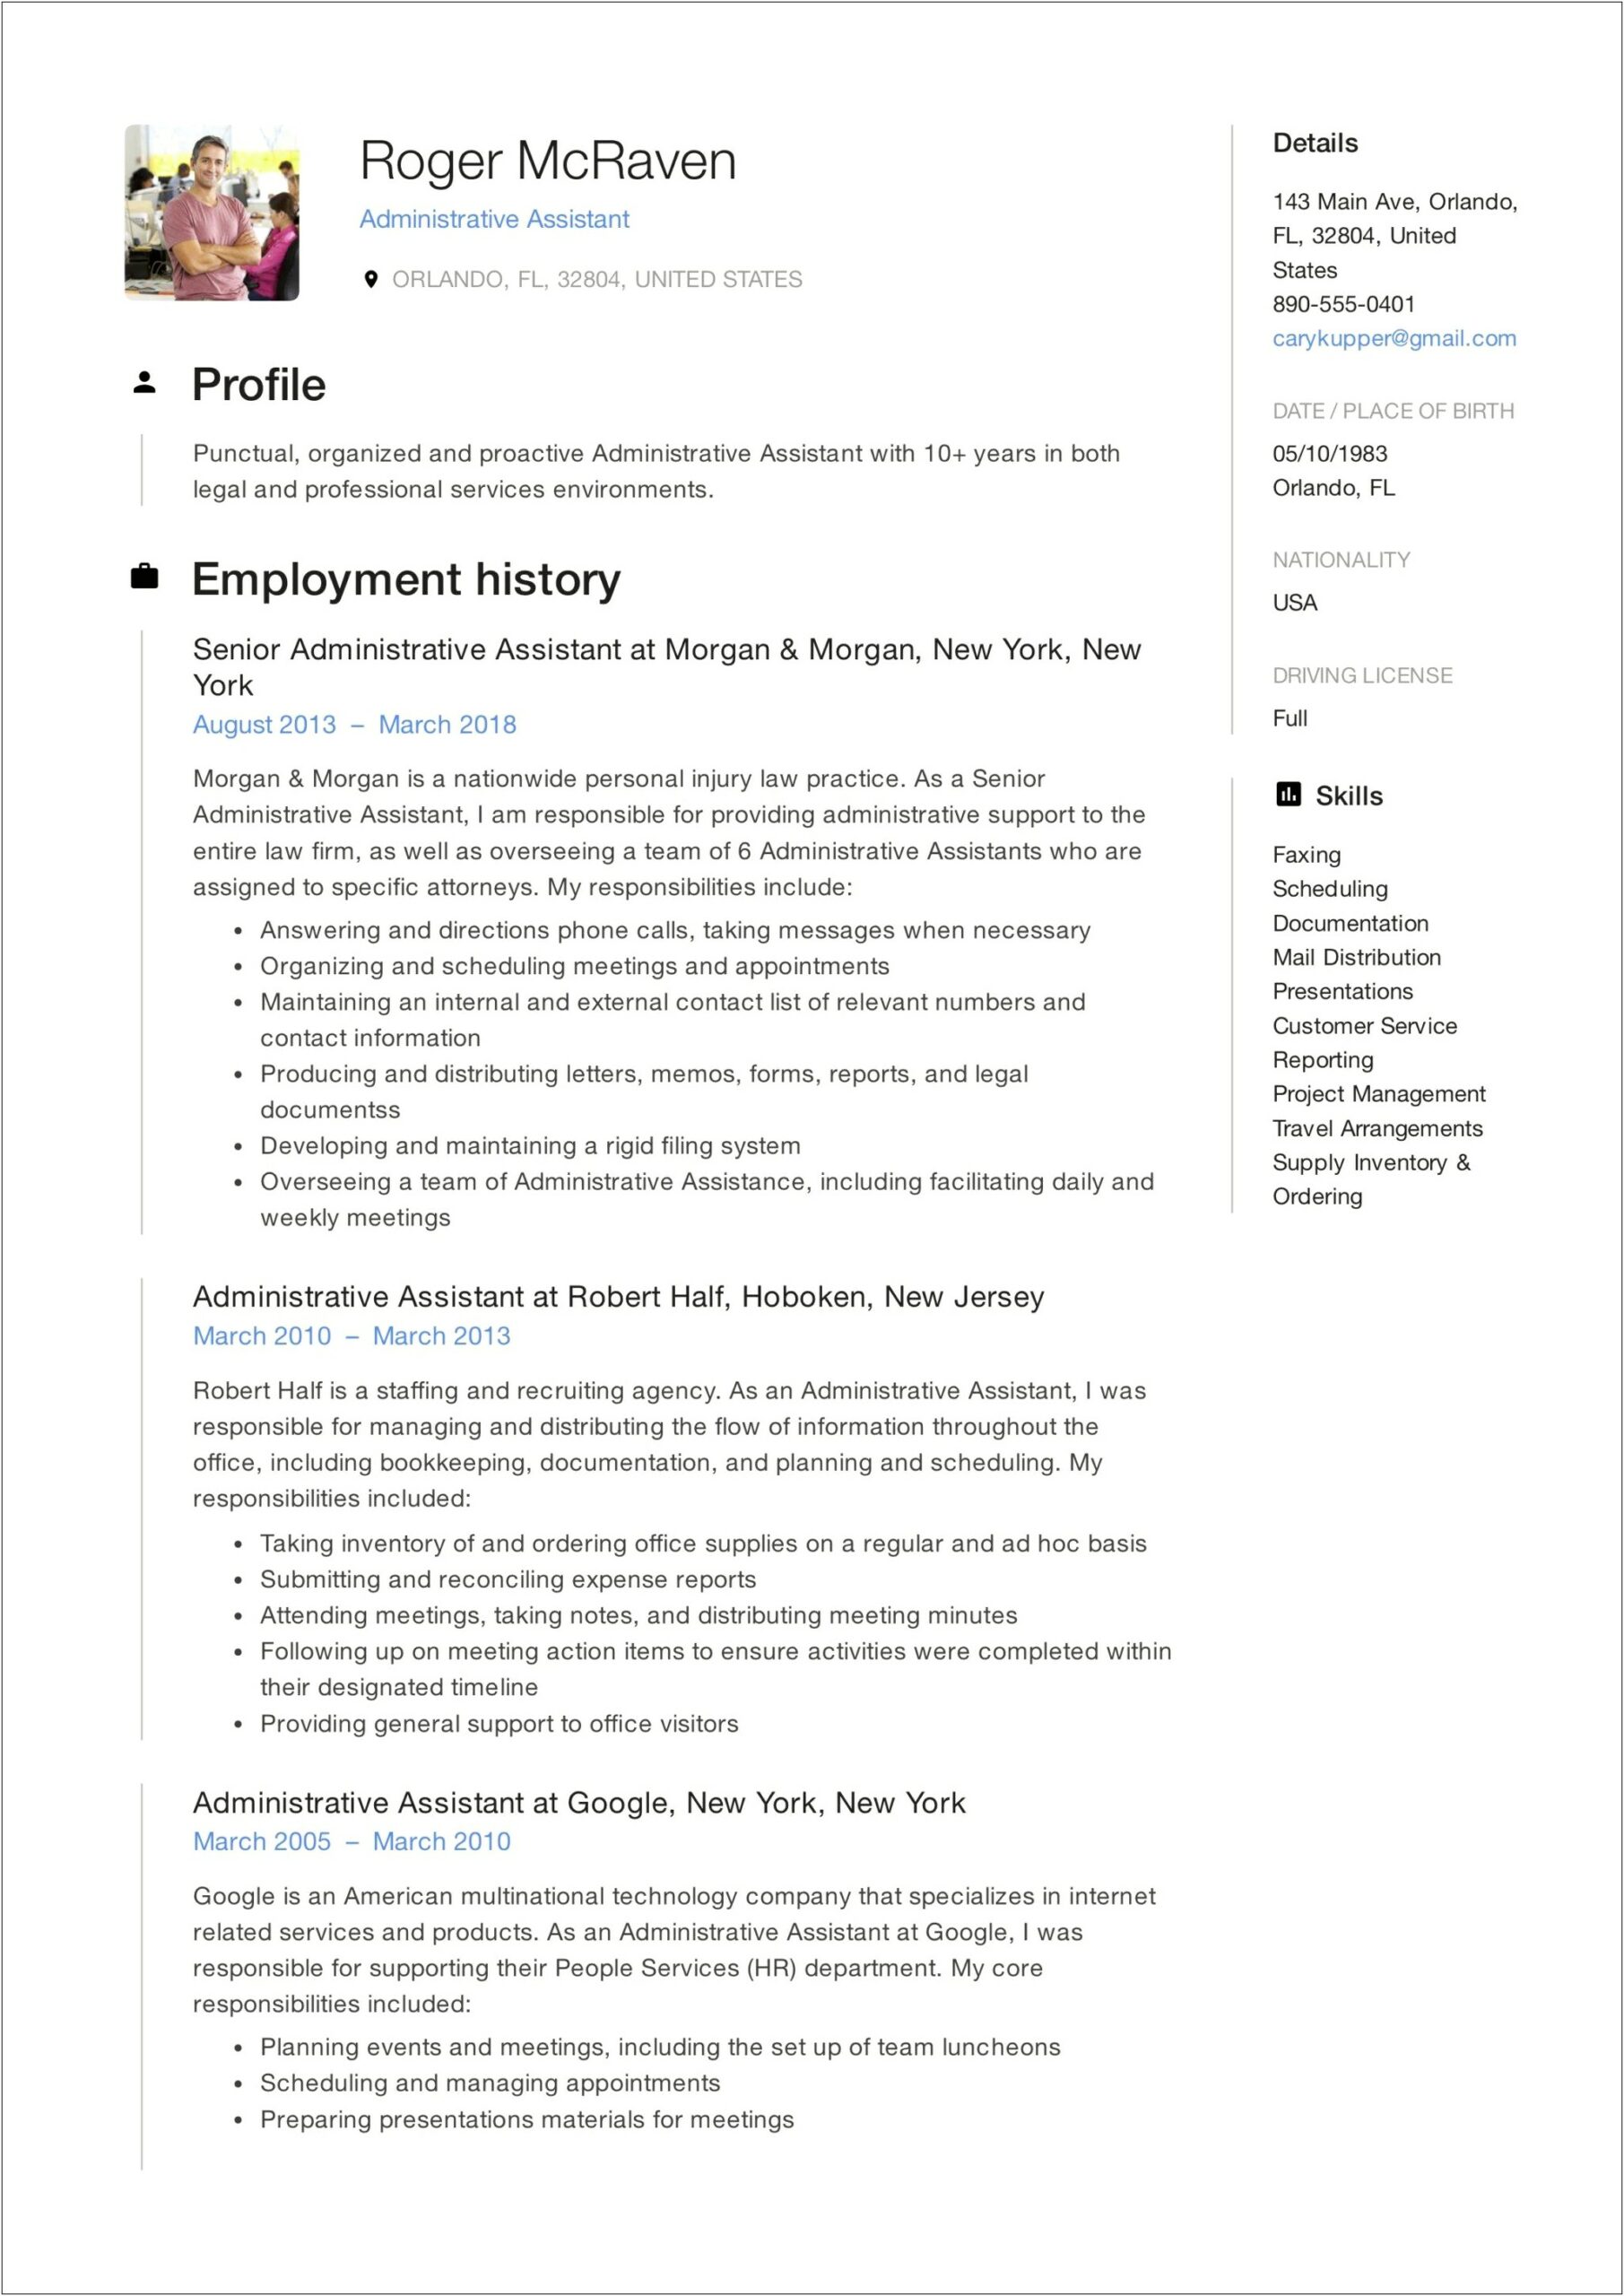 Resume Samples For Experienced Administrative Assistants